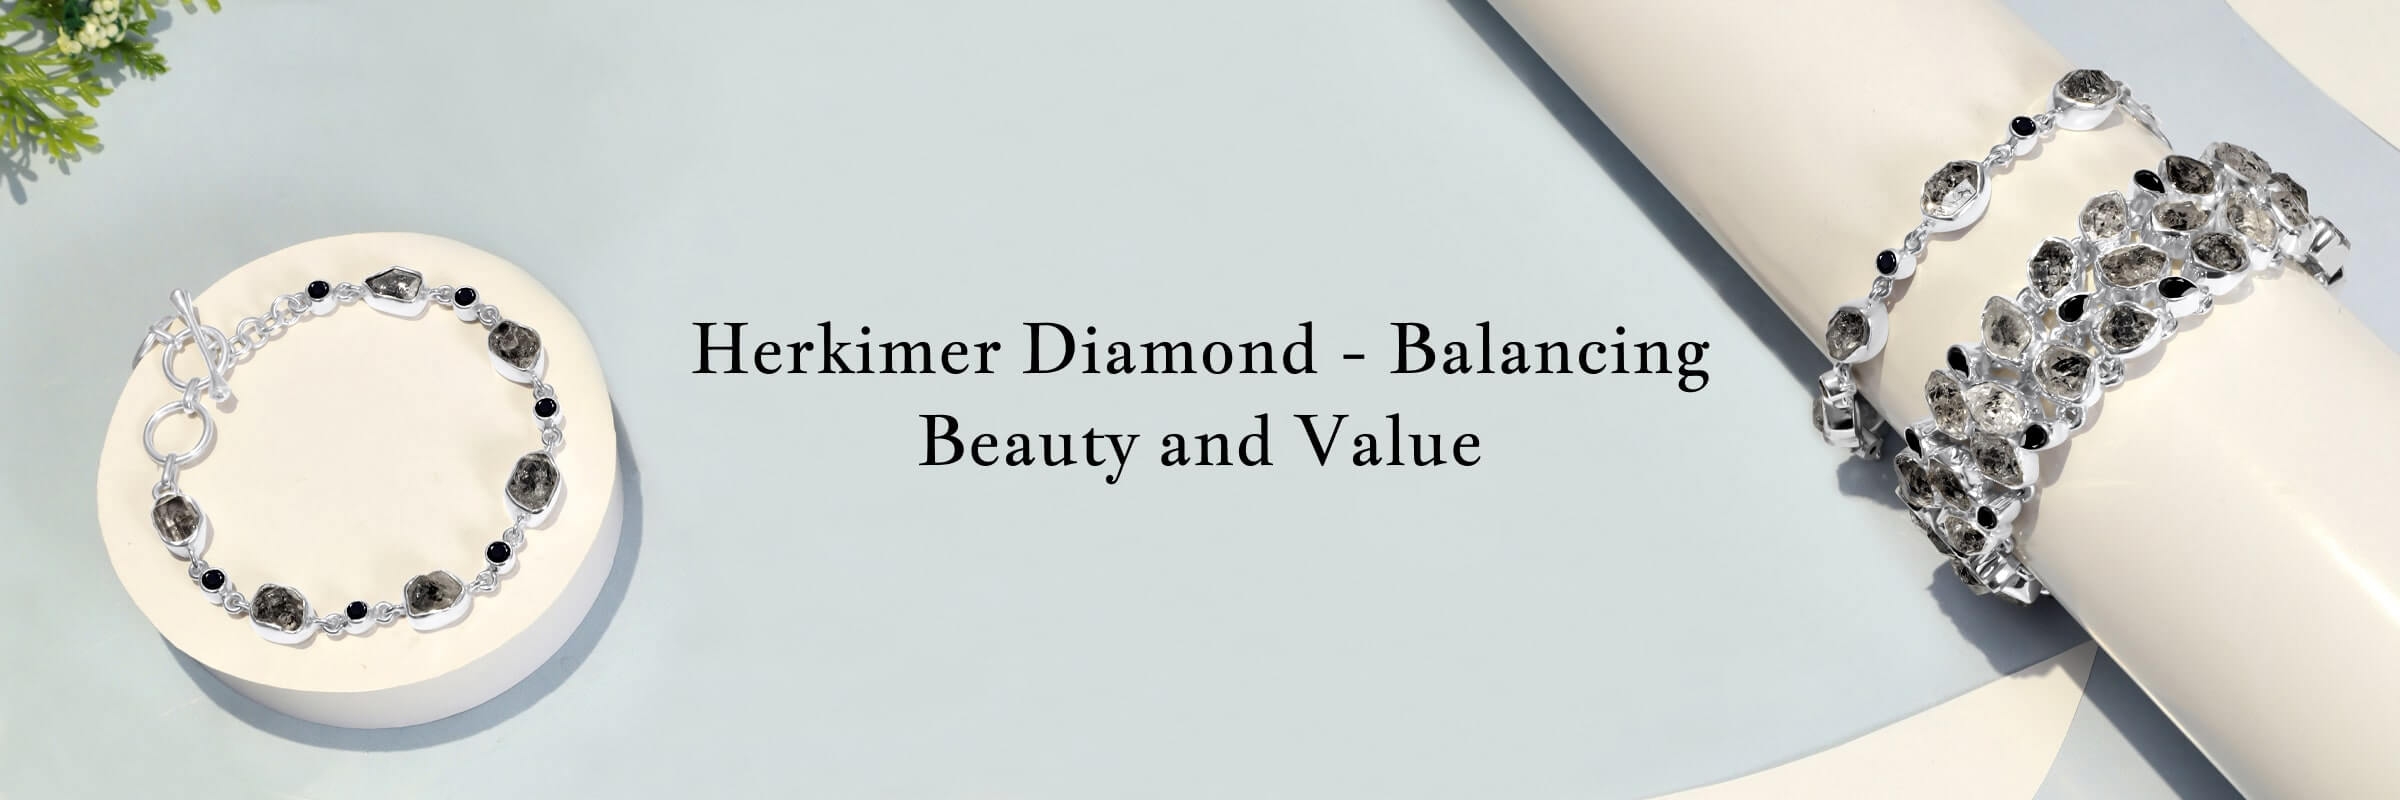 Cost and Value of Herkimer Diamond